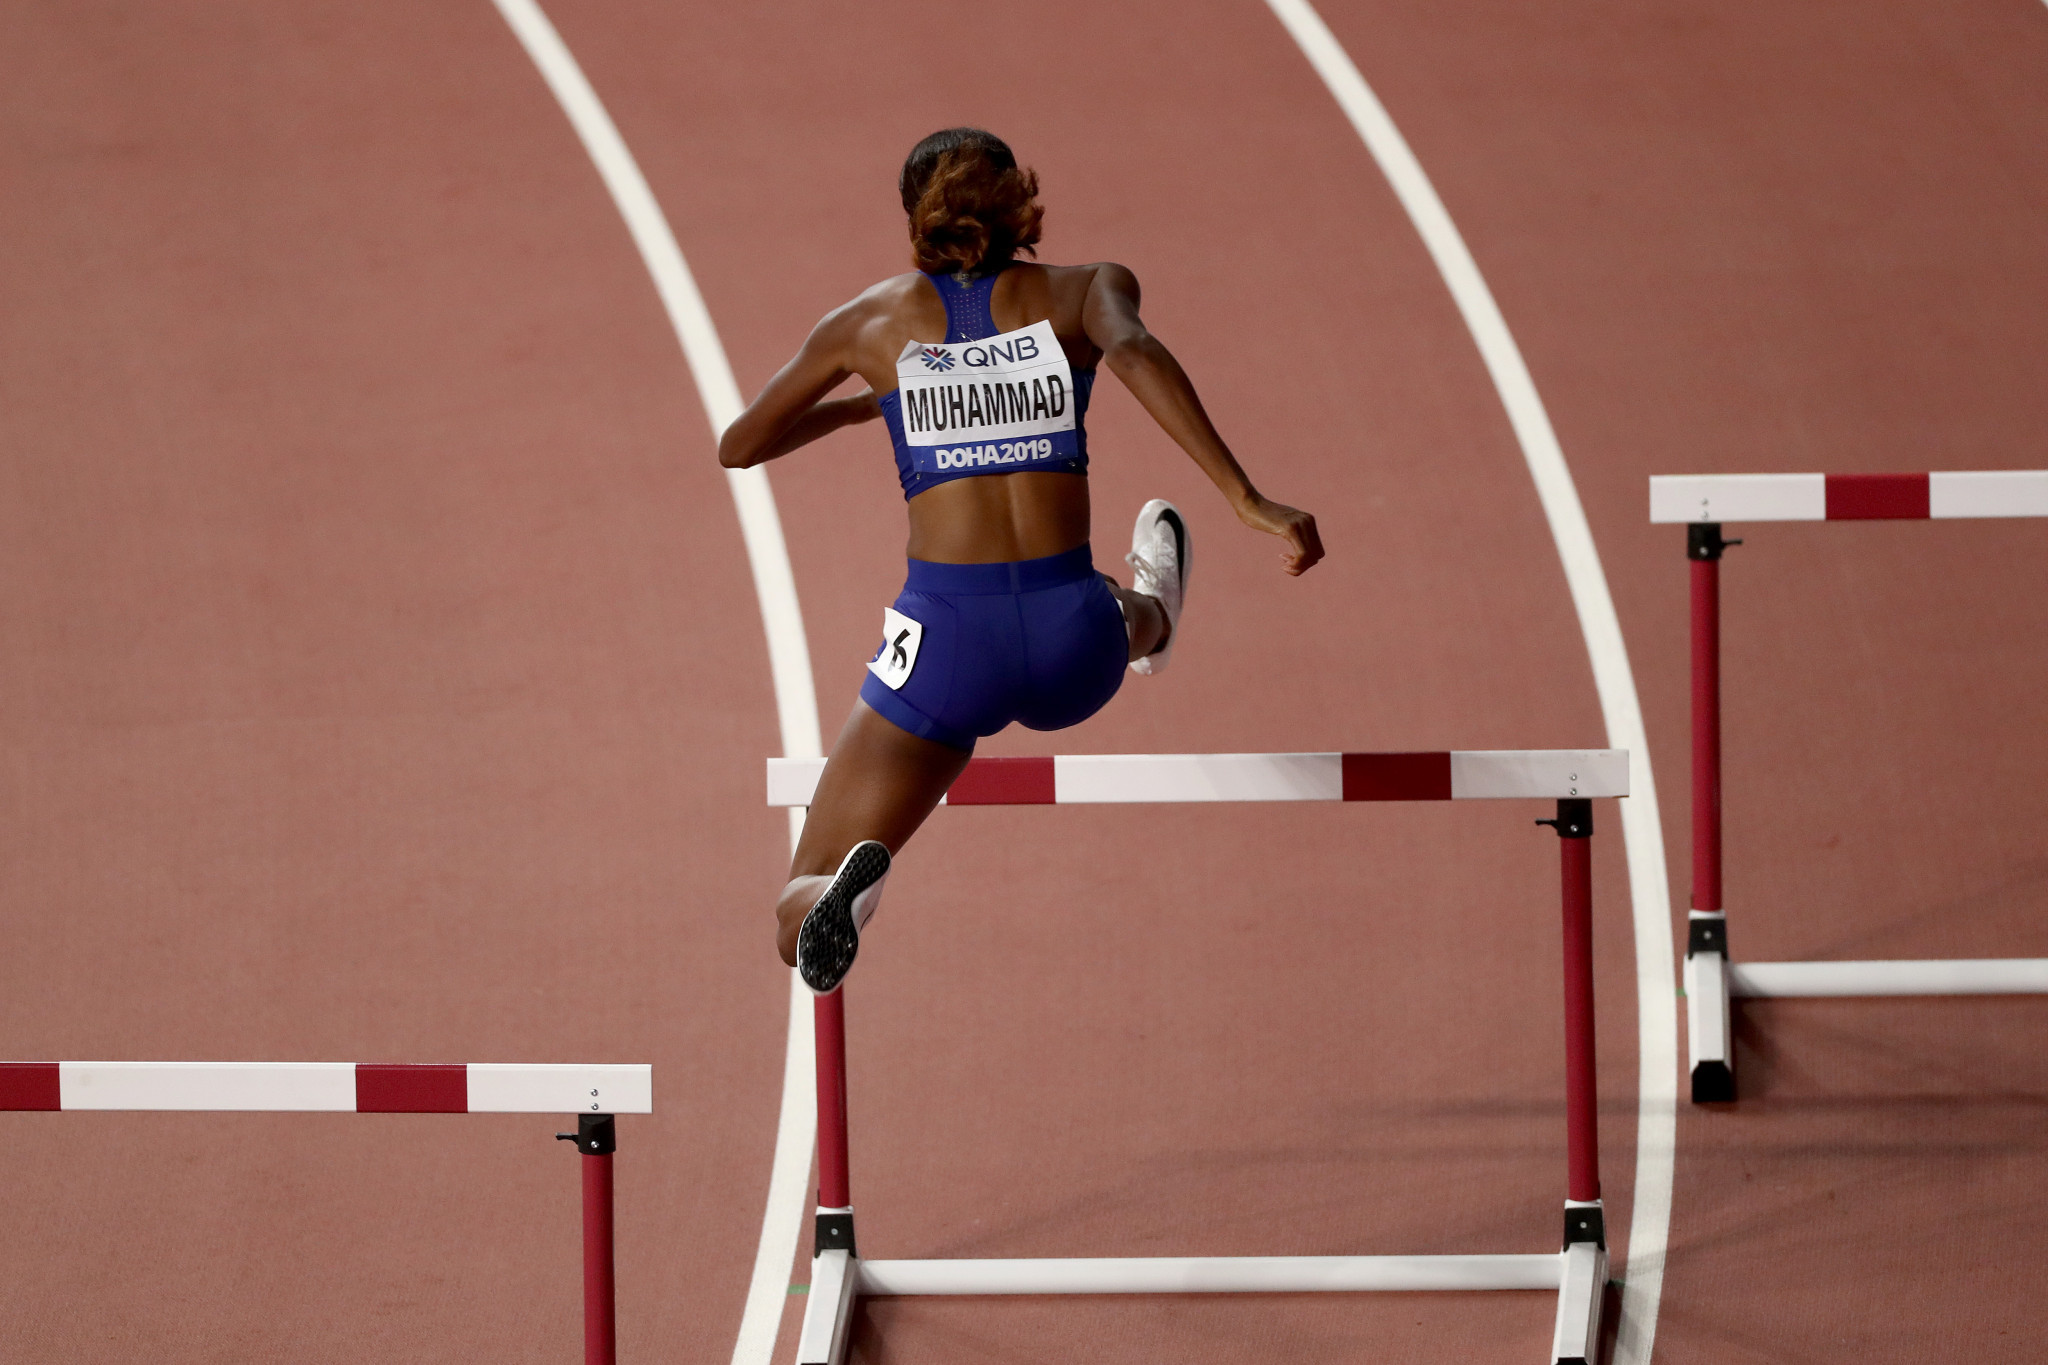 The United States' Dalilah Muhammad broke her own world record to win the women's 400m hurdles ©Getty Images